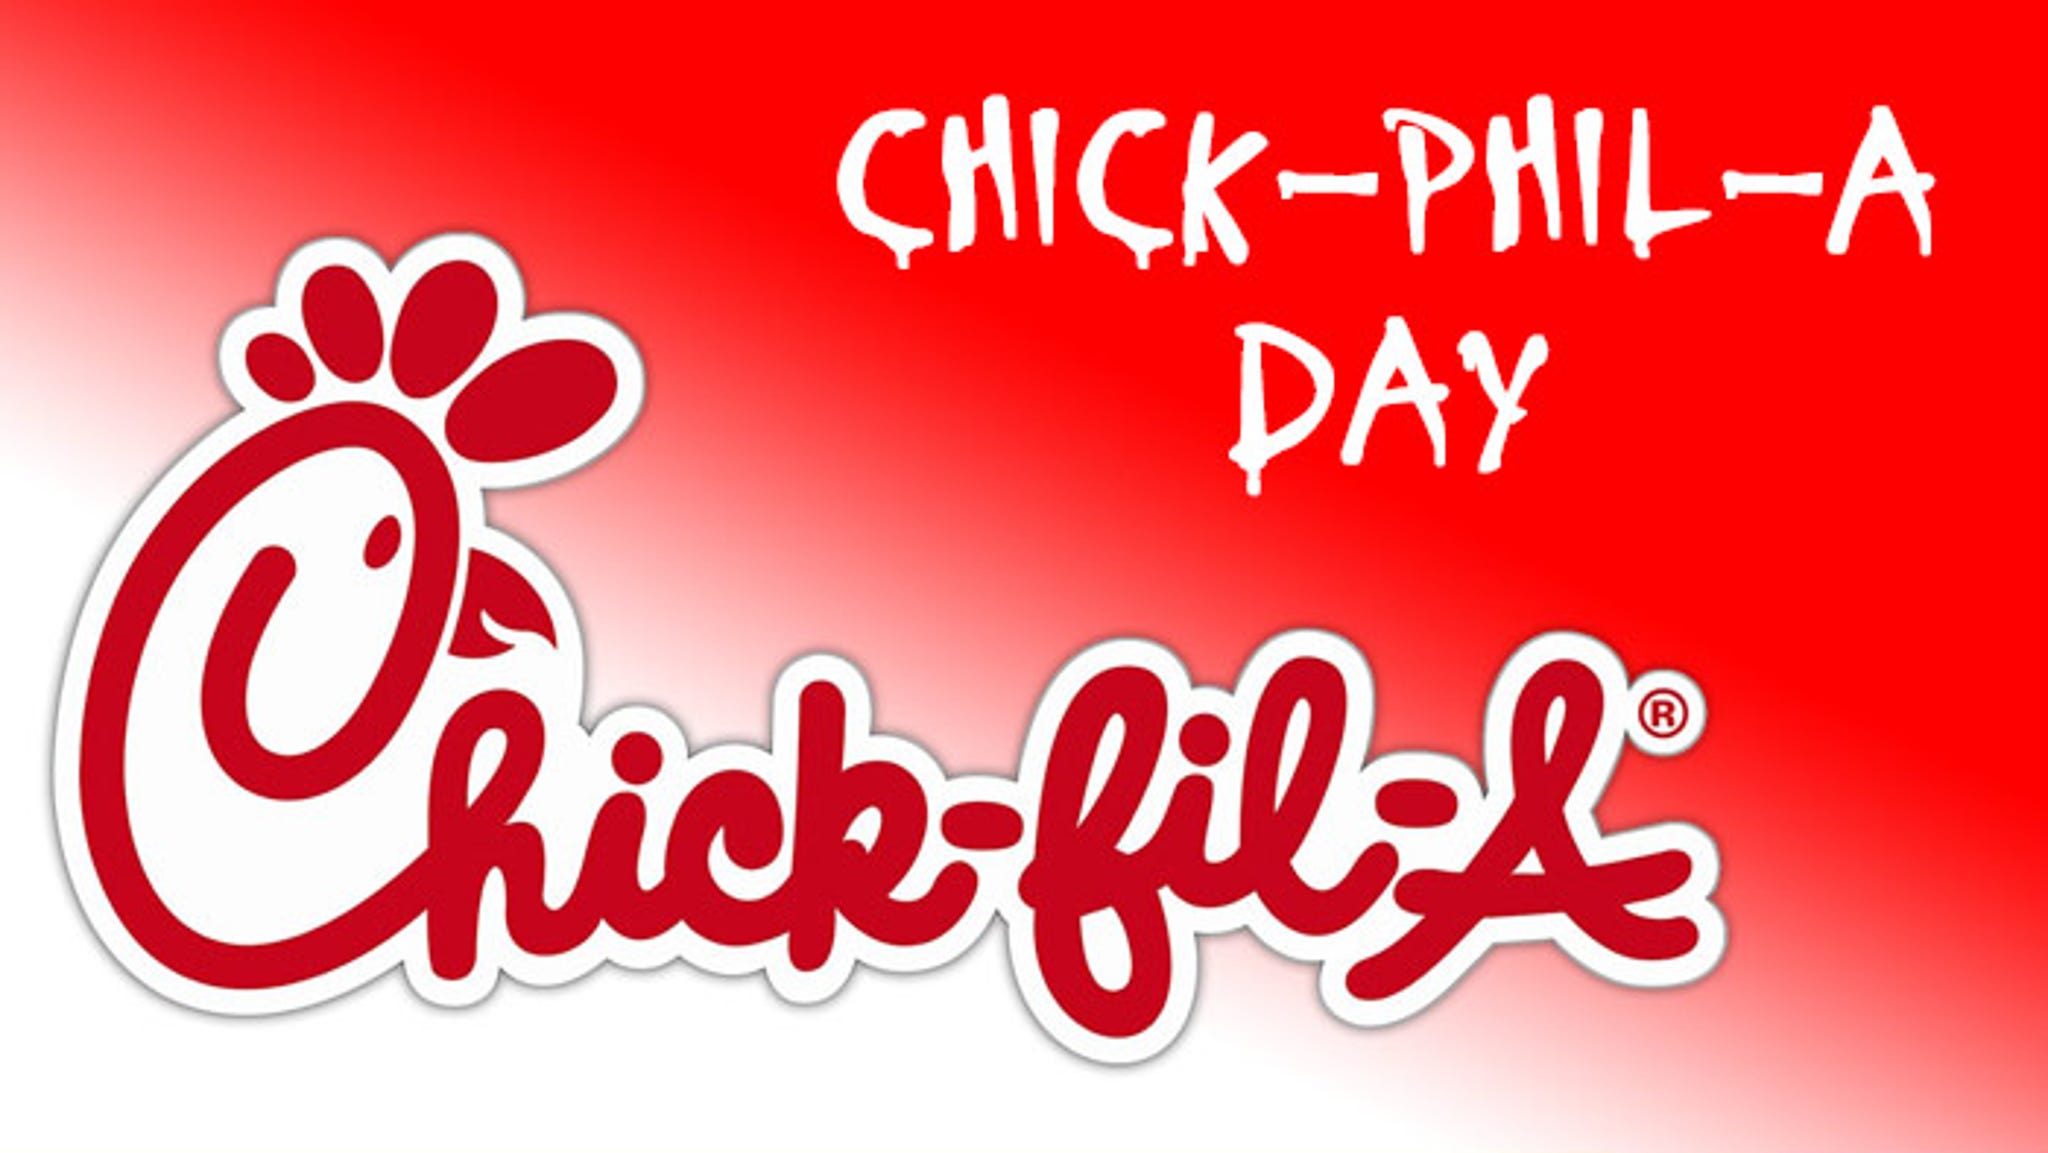 ChickfilA NO 'DUCK' FOR US We're NOT Behind ChickPhilA Day!